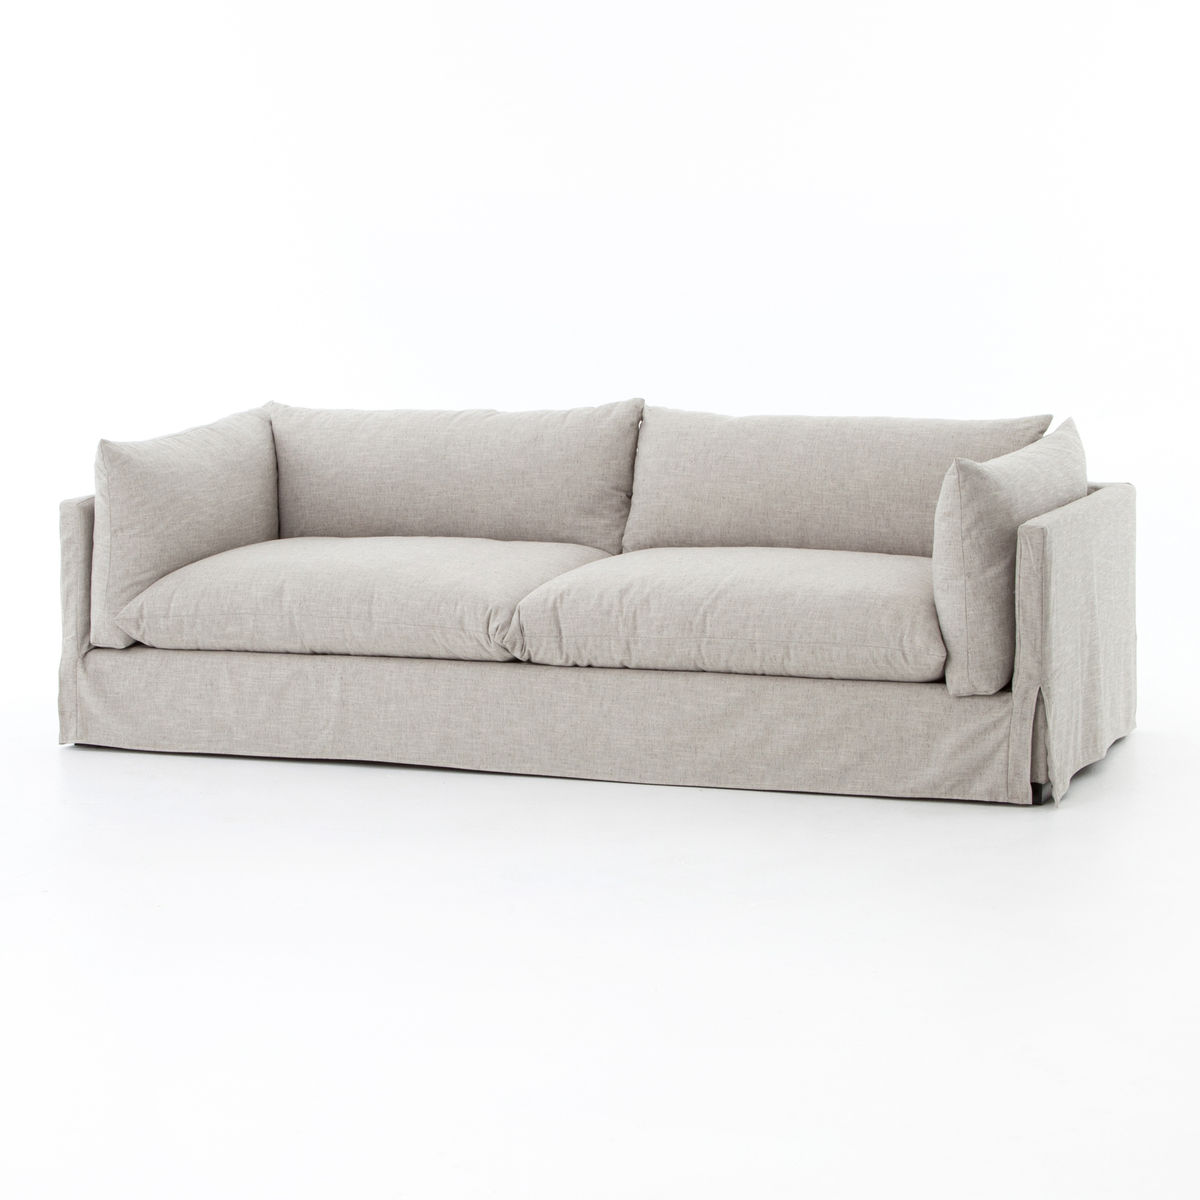 Shop Sofa-96"-High Performance from Peggy Haddad Interiors Home on Openhaus